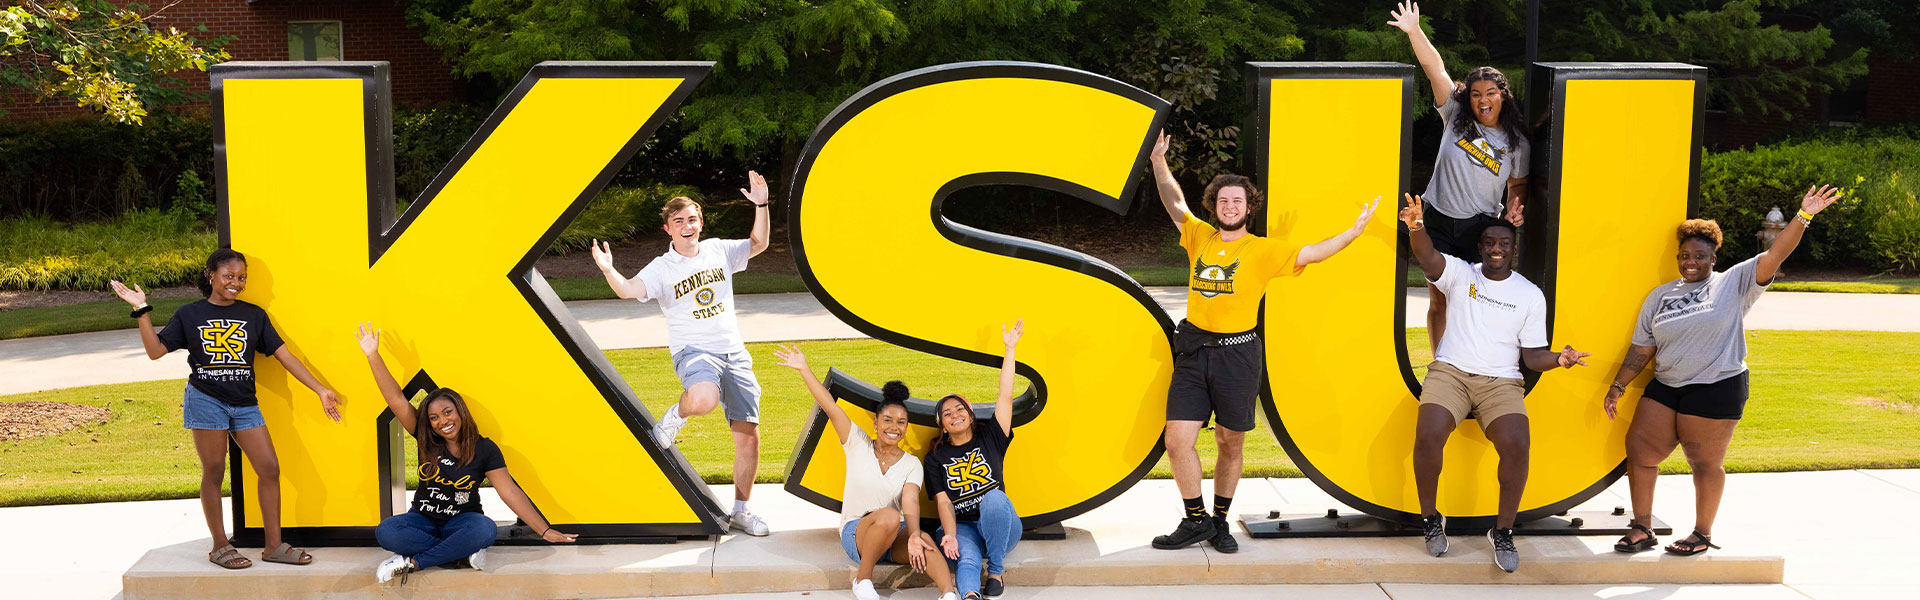 group of ksu students taking a picture in front of the KSU letters.